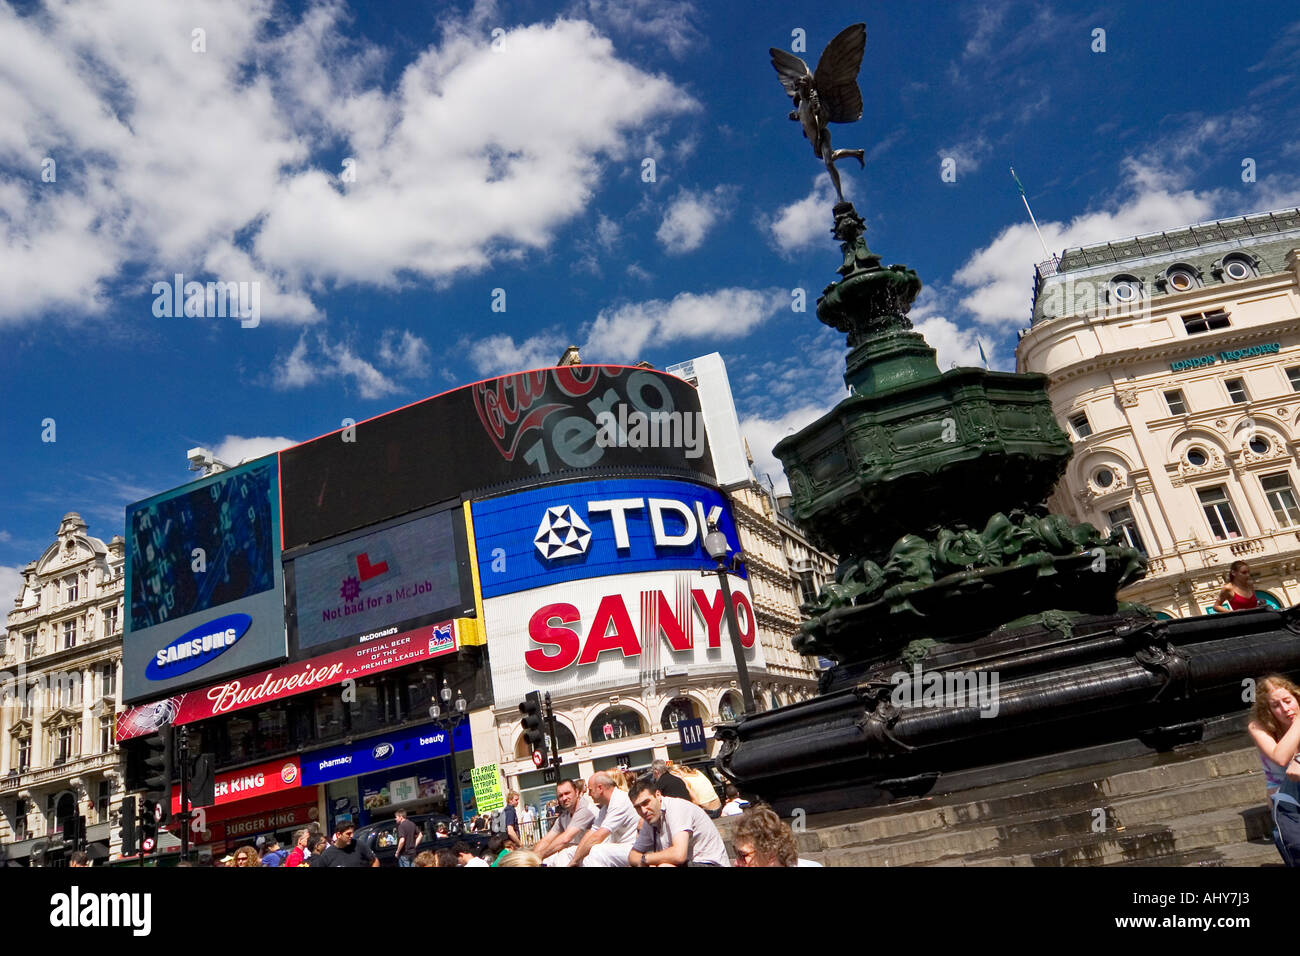 Eros-Statue am Piccadilly Circus in London Stockfoto